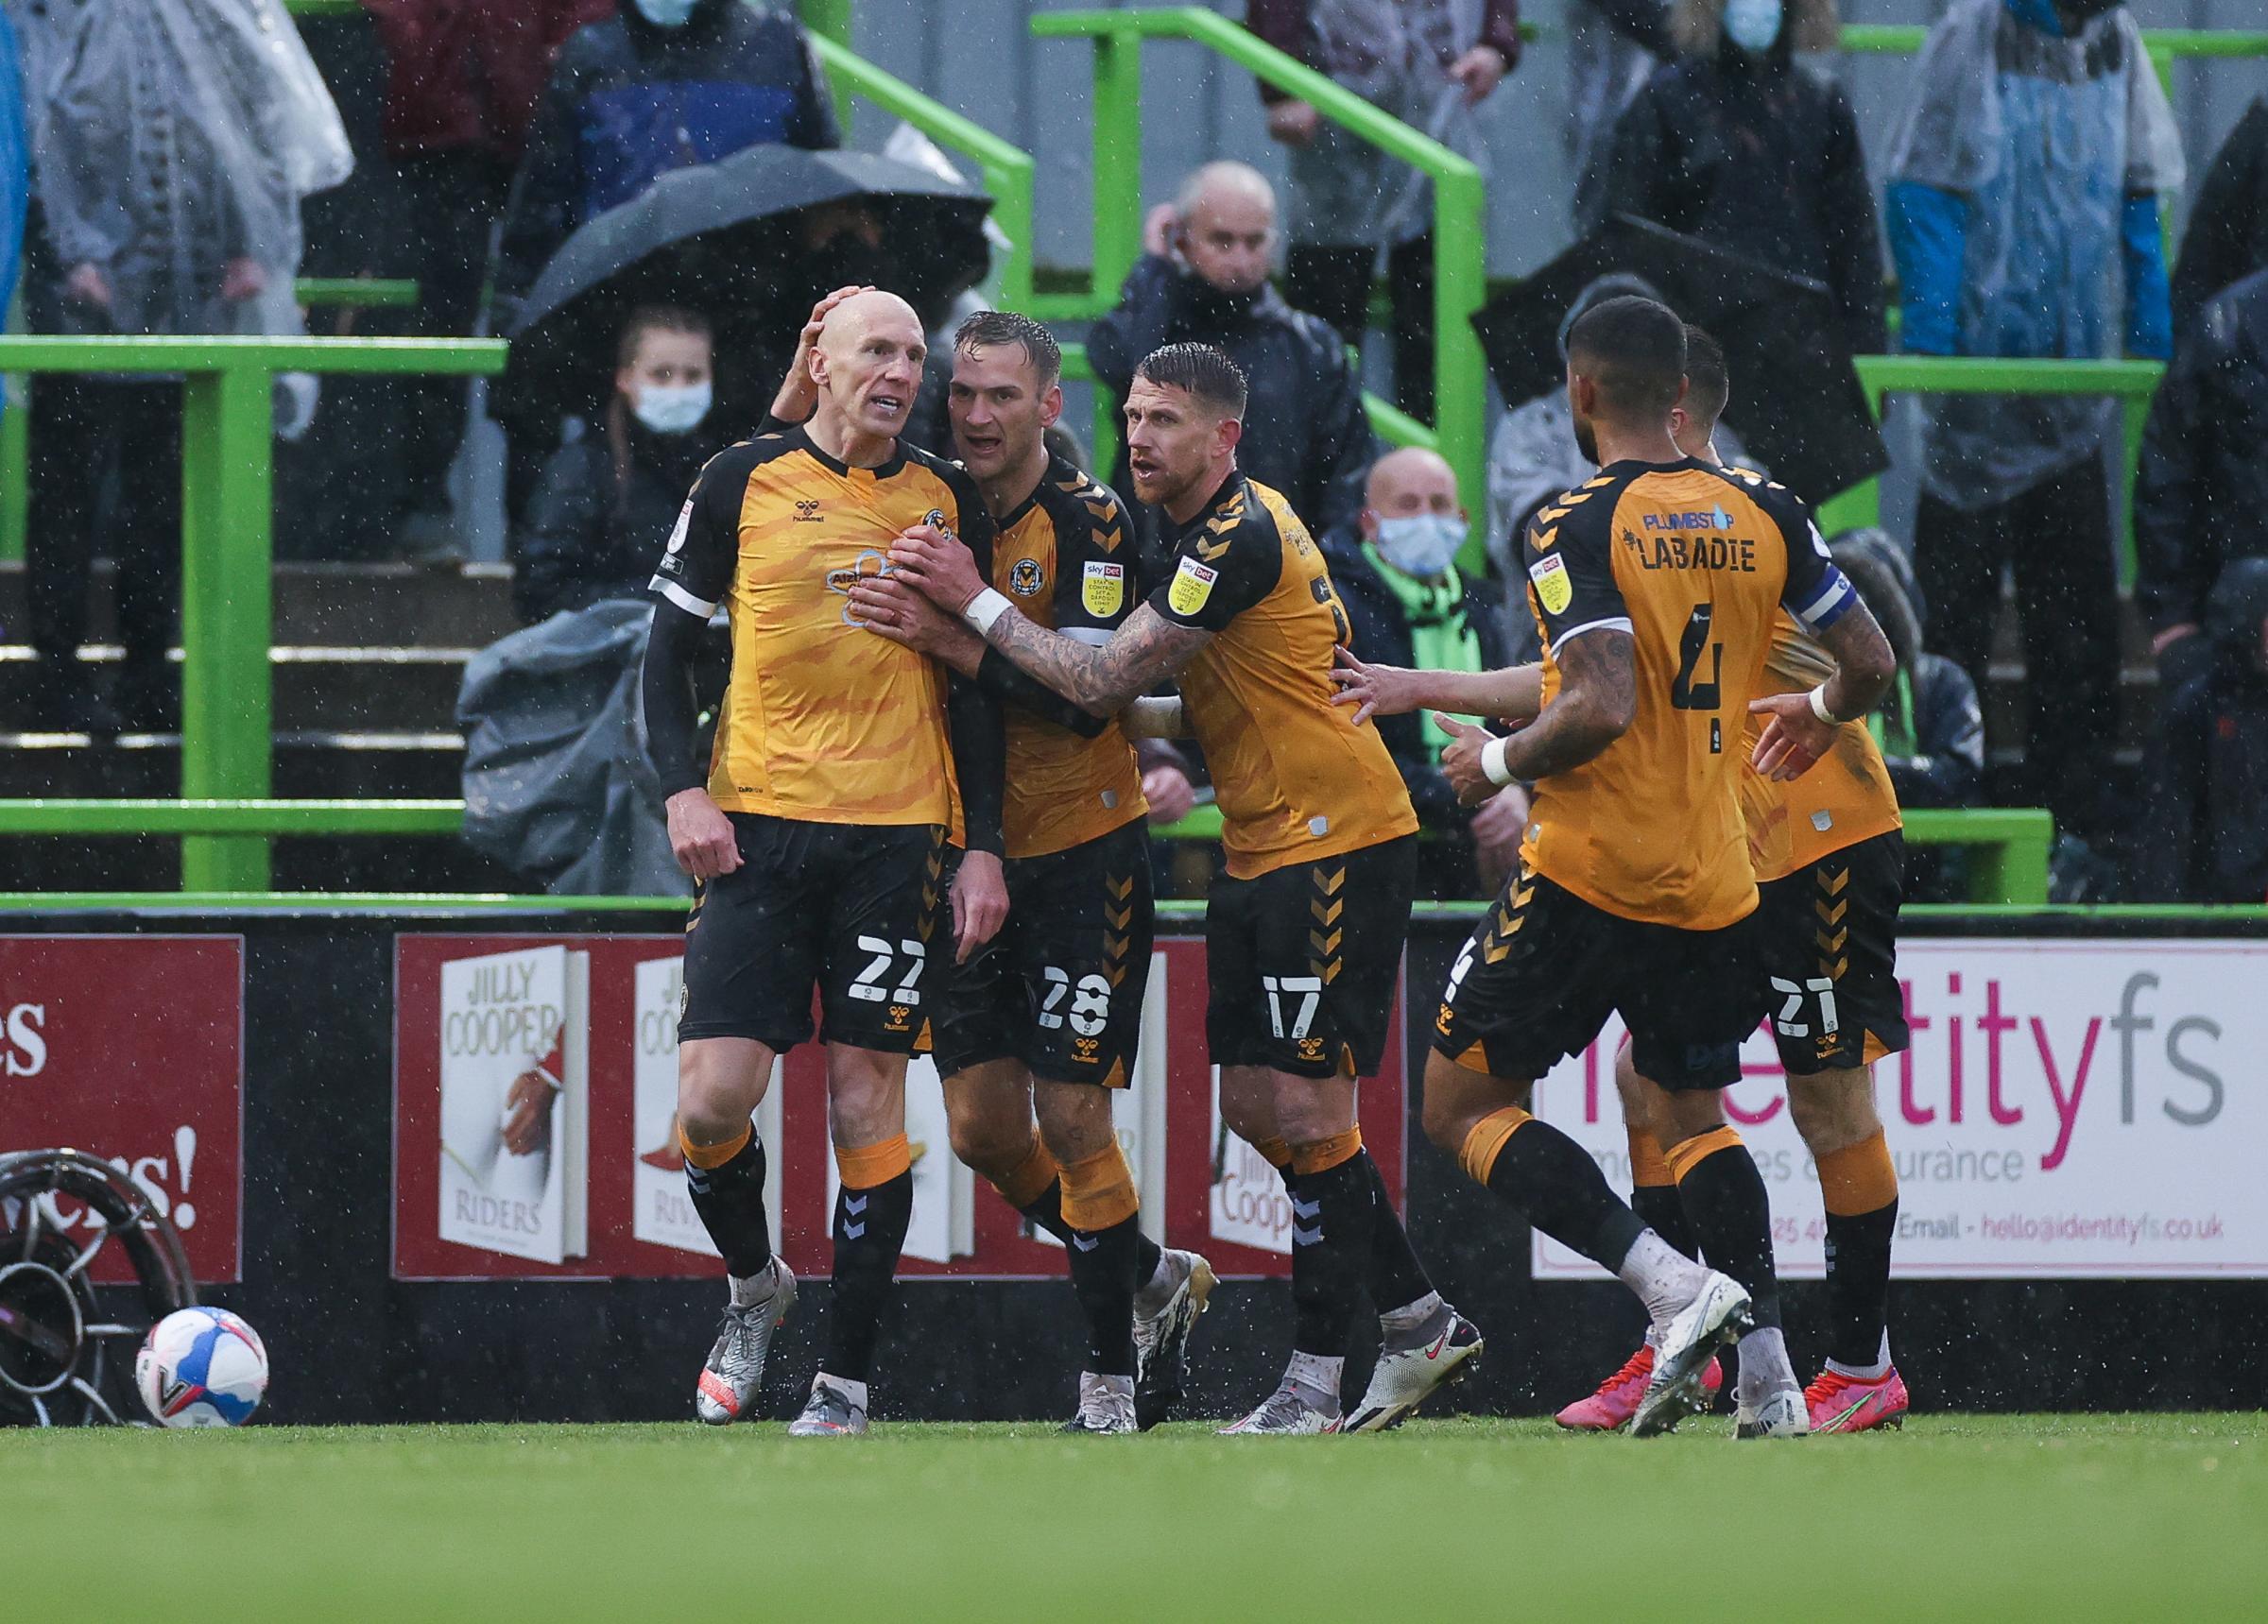 Kevin Ellison of Newport County wheels away to celebrate with team mates after scoring goal